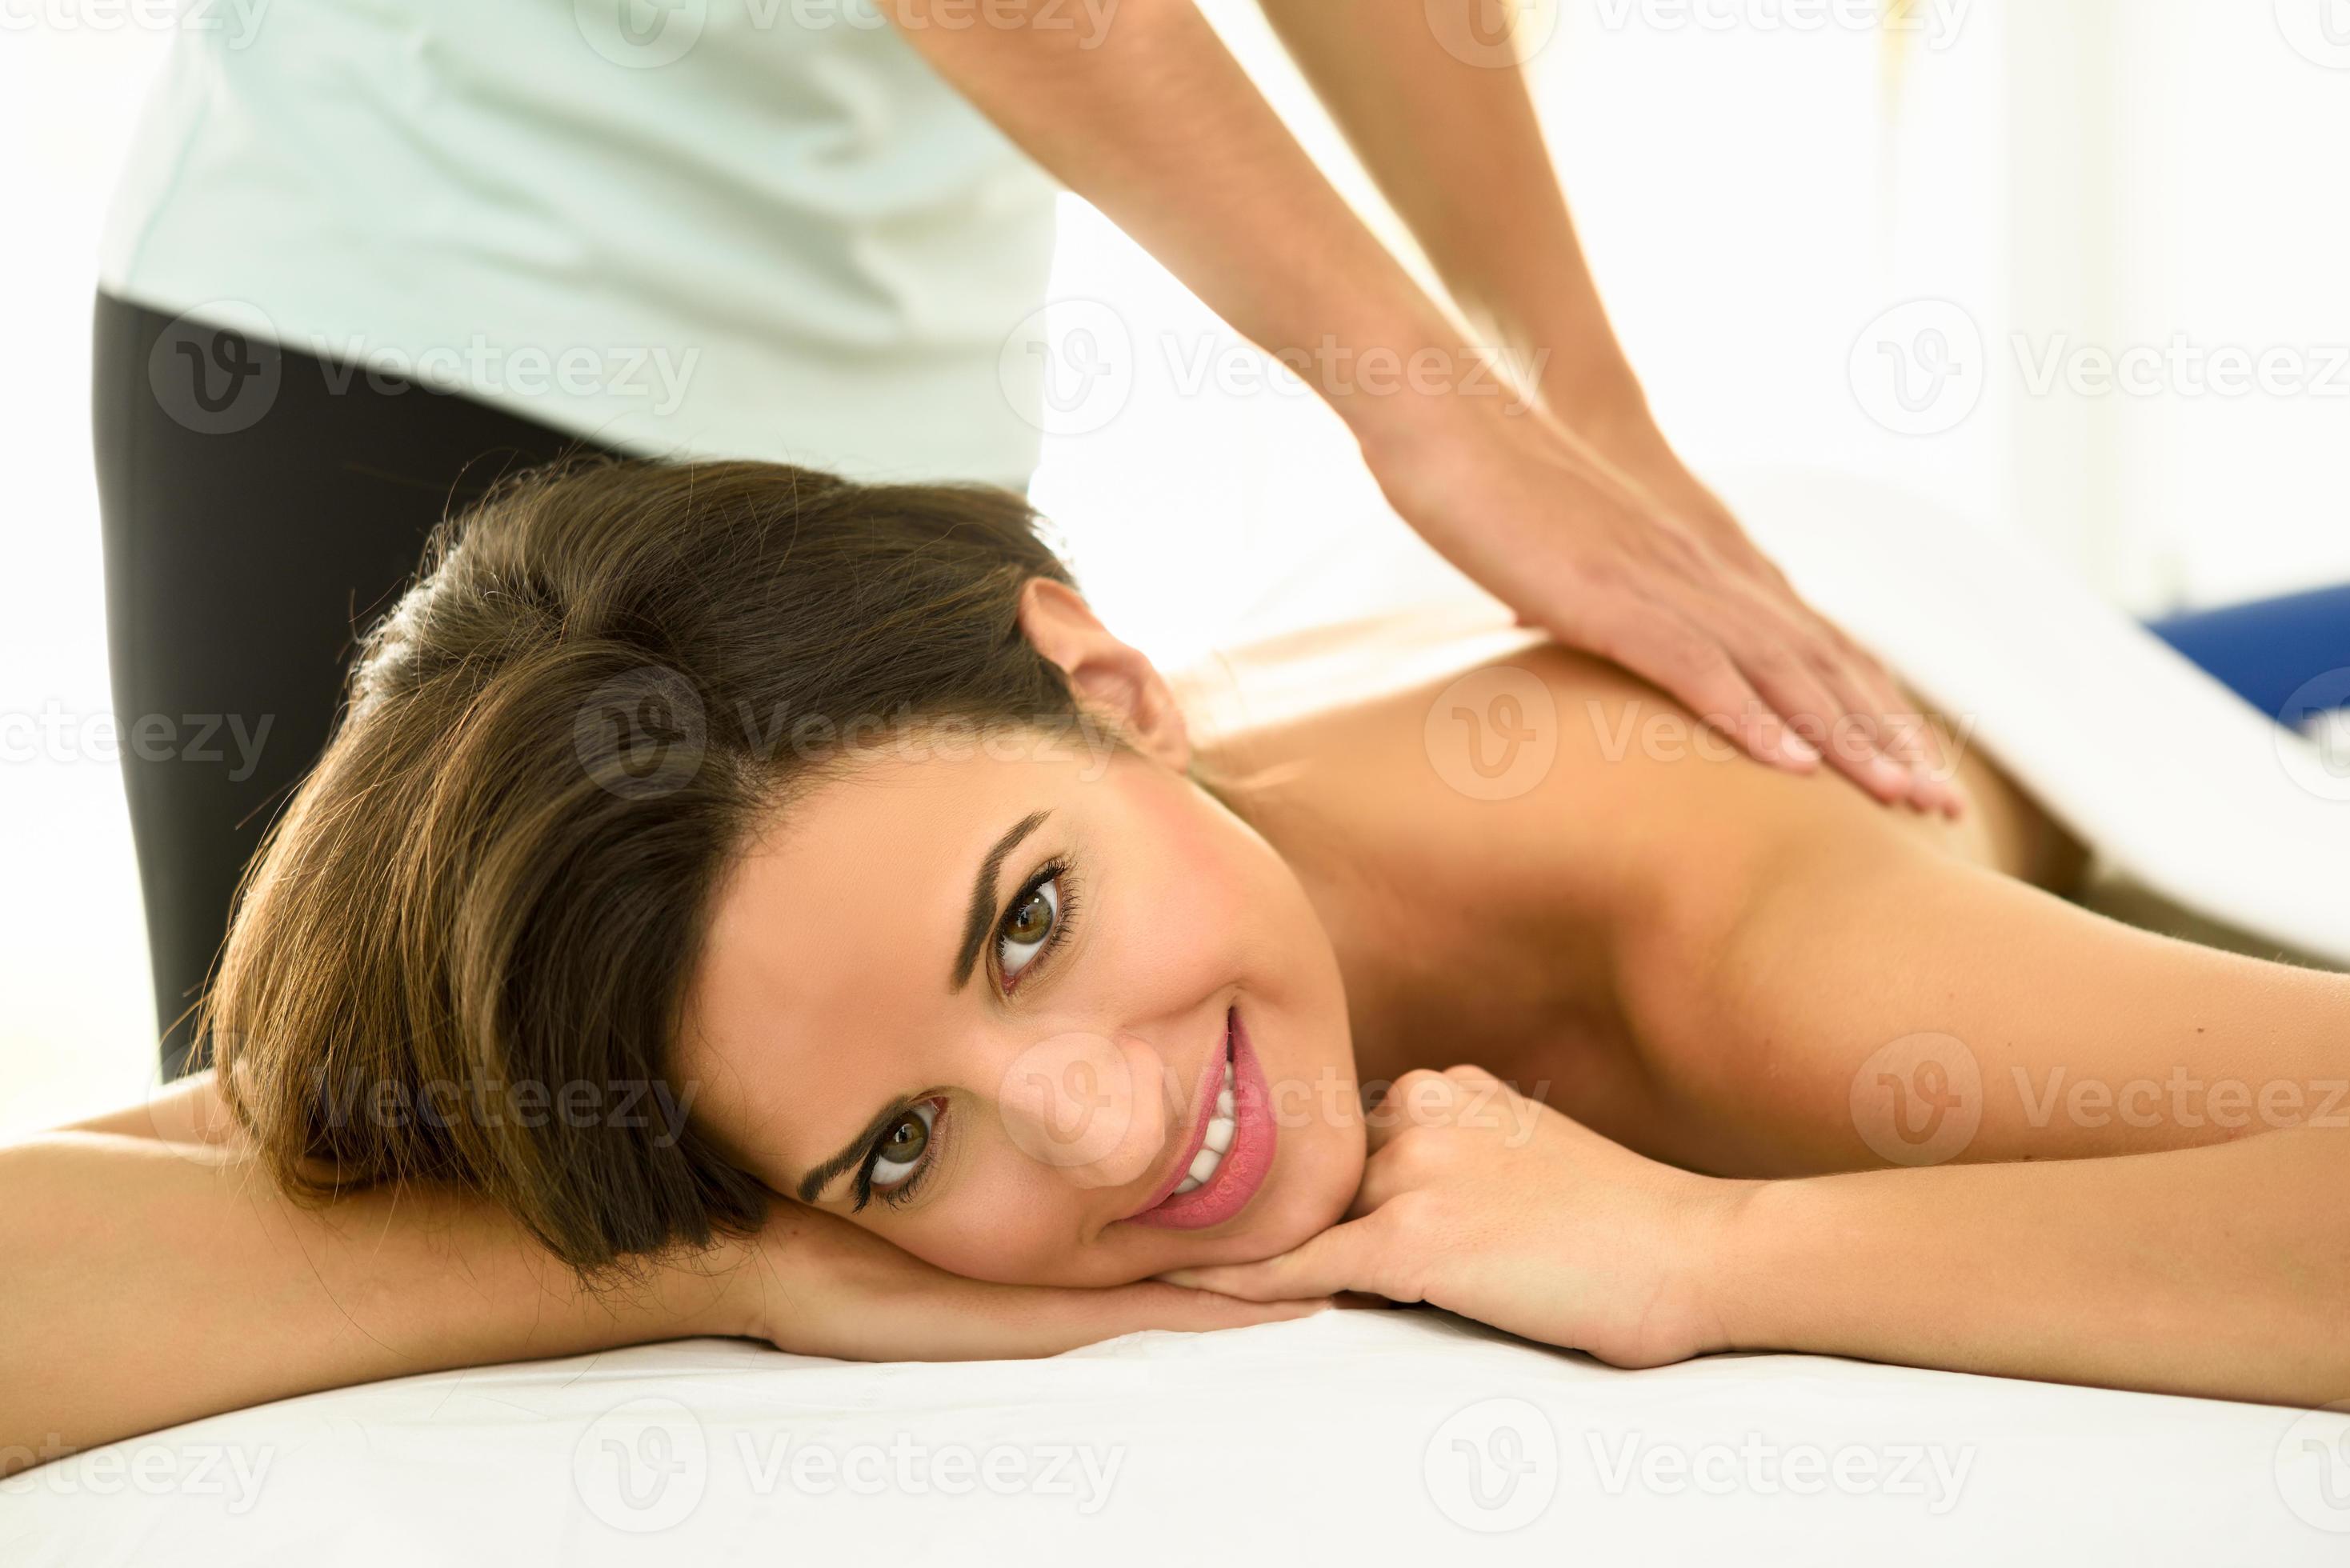 https://static.vecteezy.com/system/resources/previews/004/676/323/large_2x/young-woman-receiving-a-back-massage-in-a-spa-center-photo.jpg